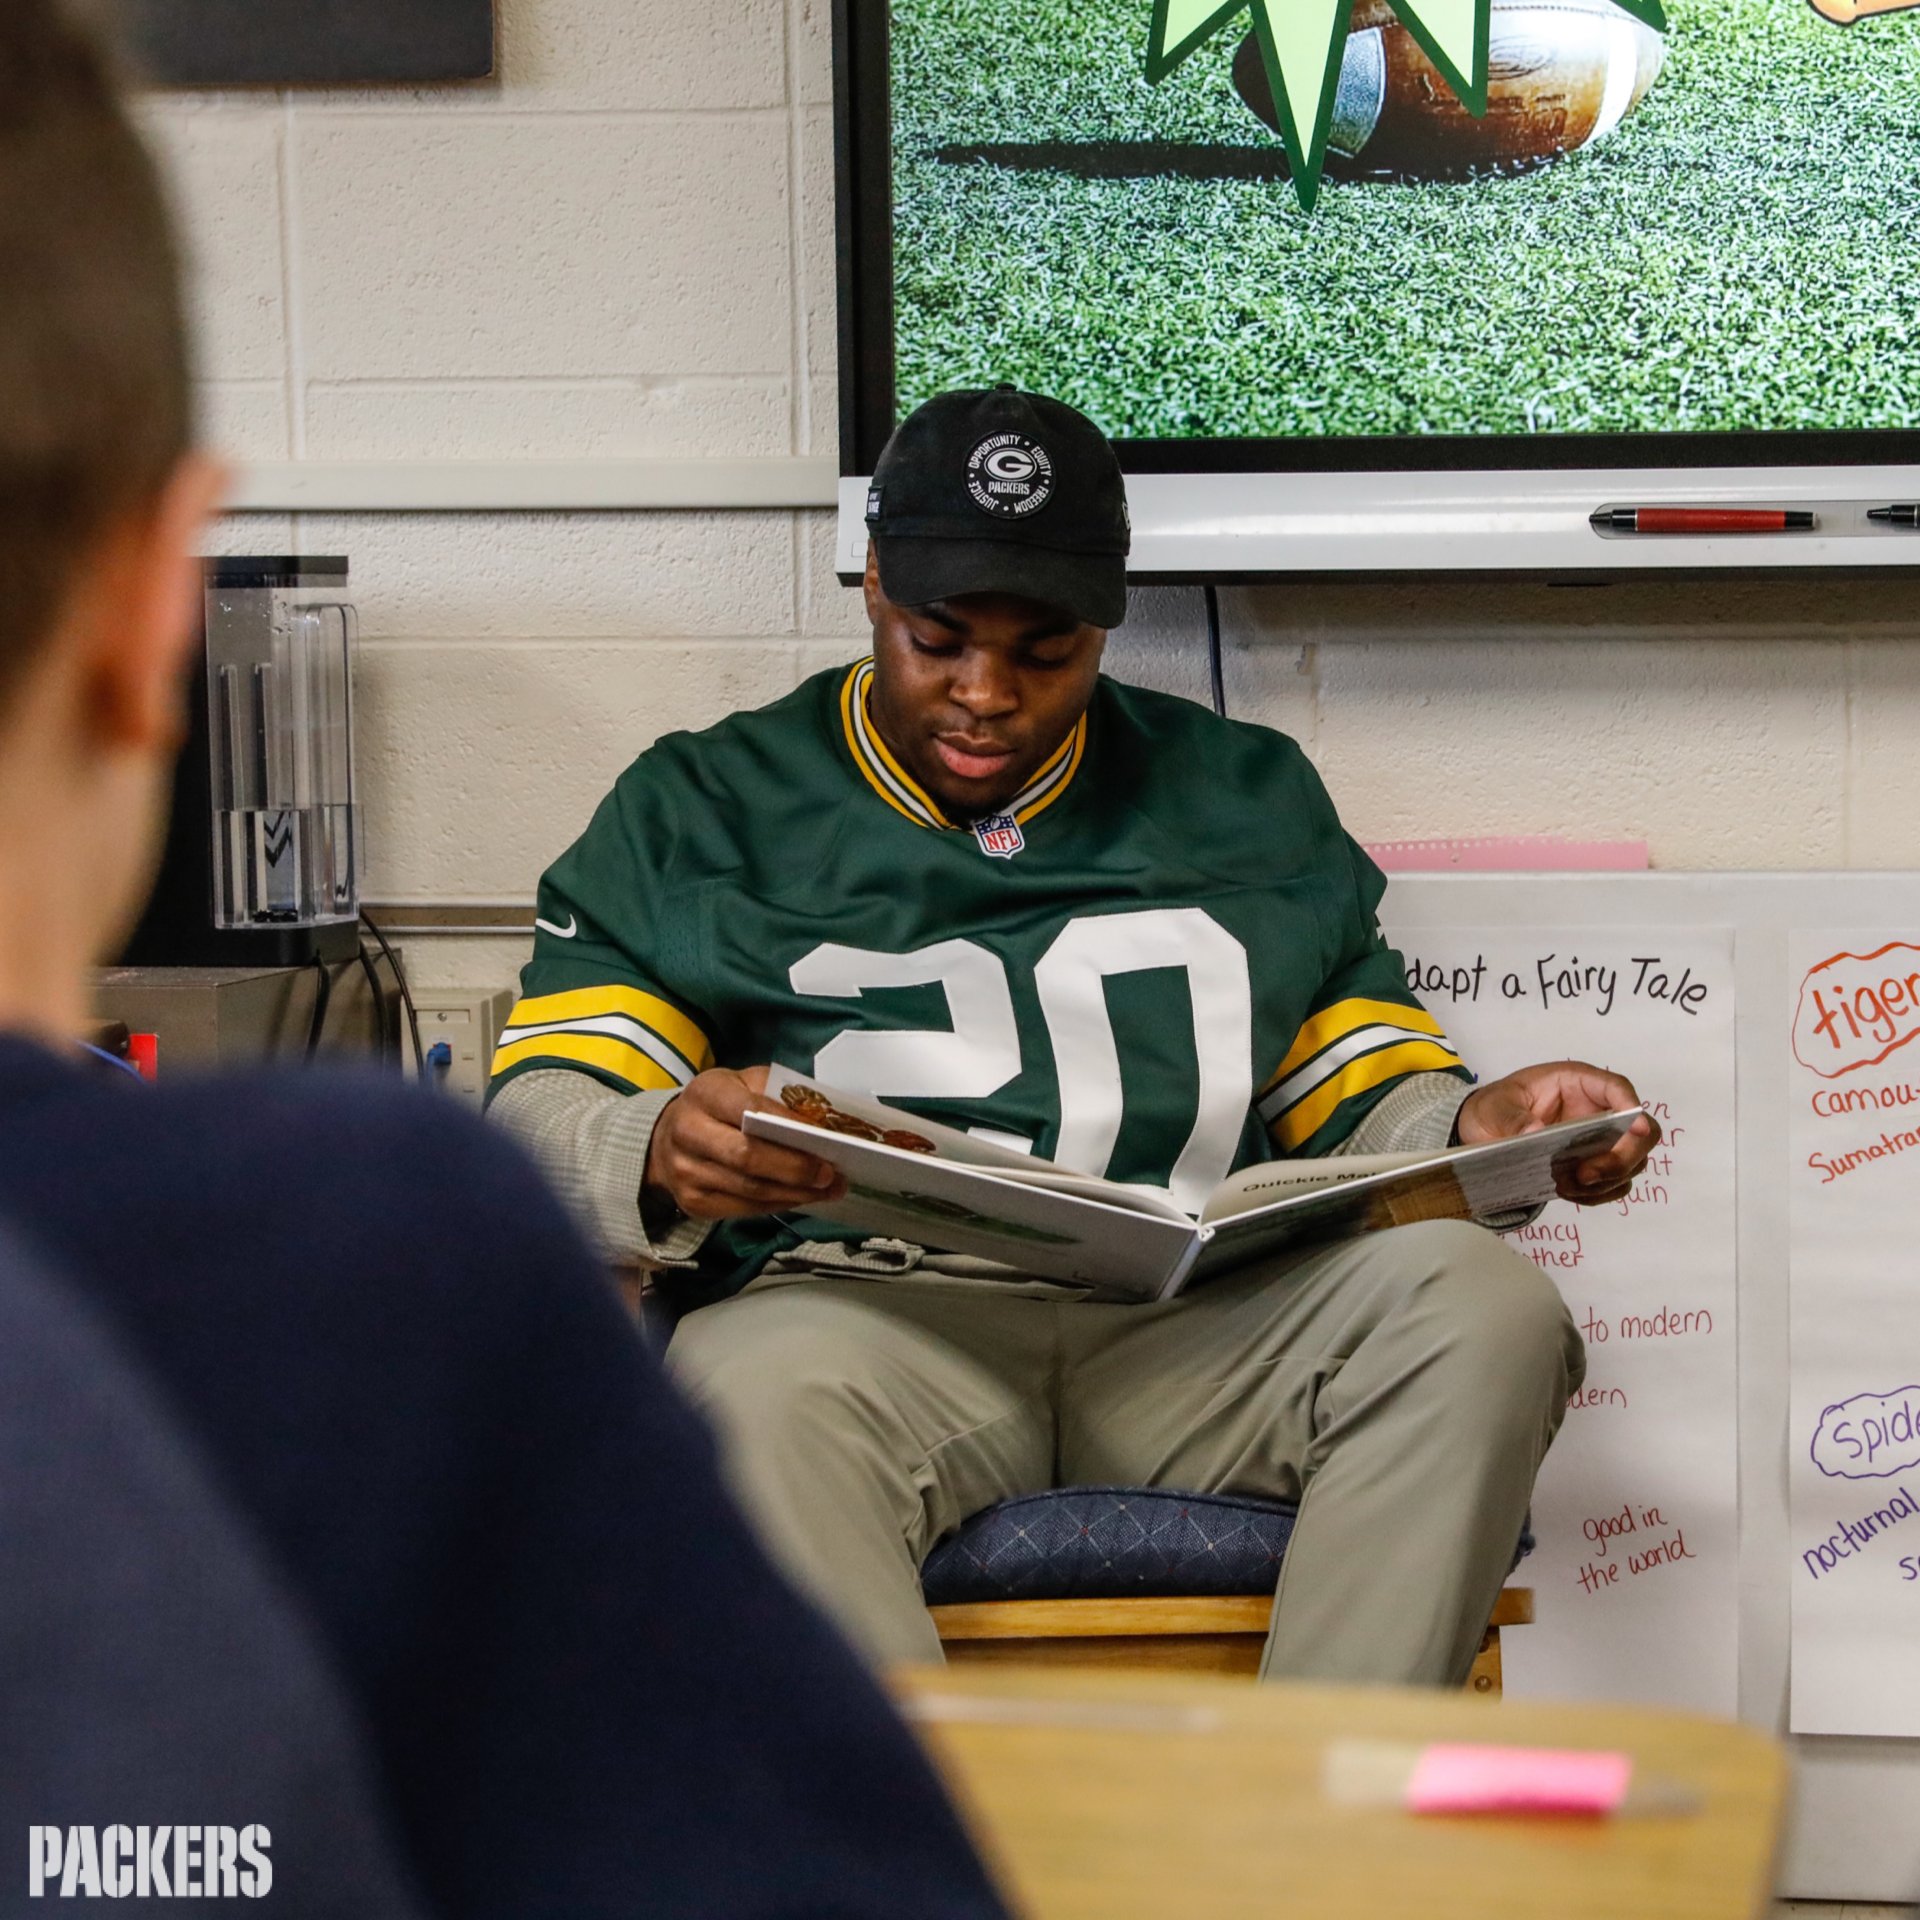 Green Bay Packers on X: 'Today a Reader; Tomorrow a Leader 